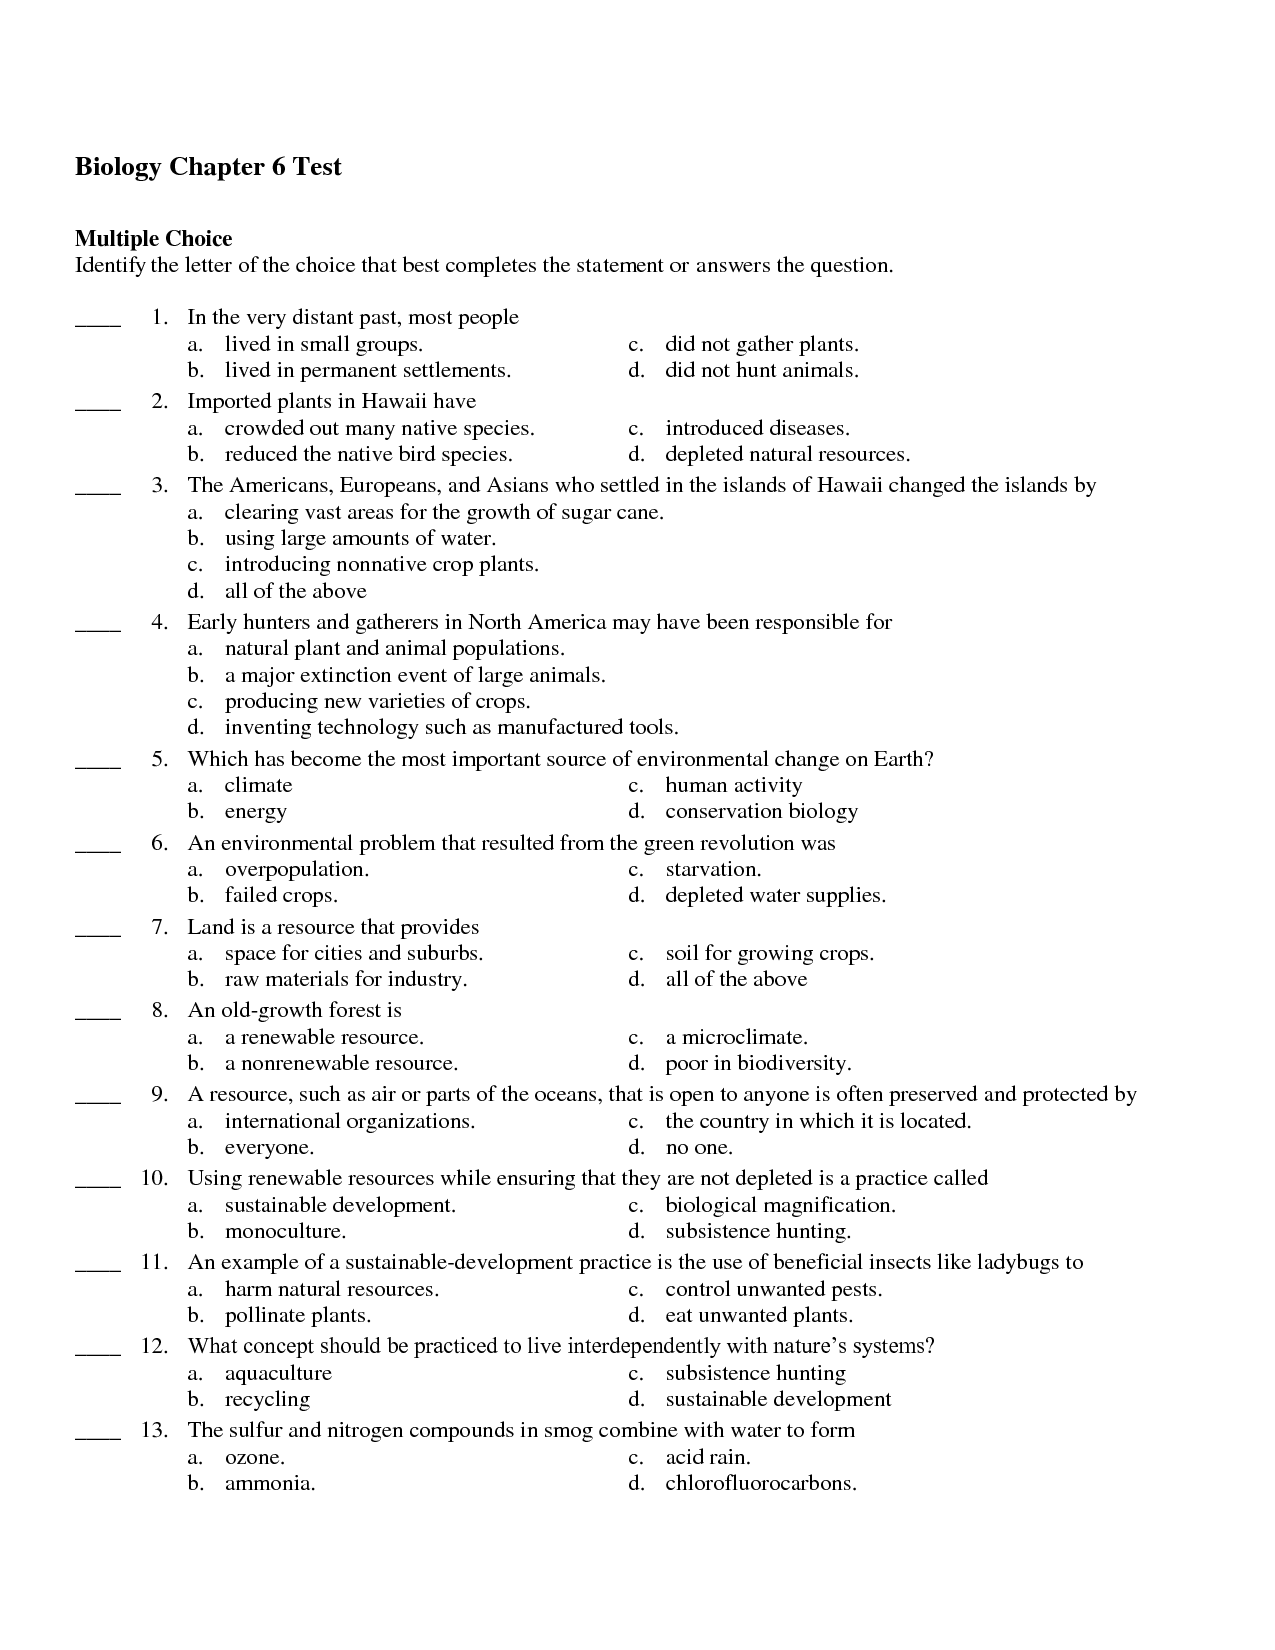 18 Best Images of Biology Review Worksheets Answer Key Biology Sol Review Packet Answer Key